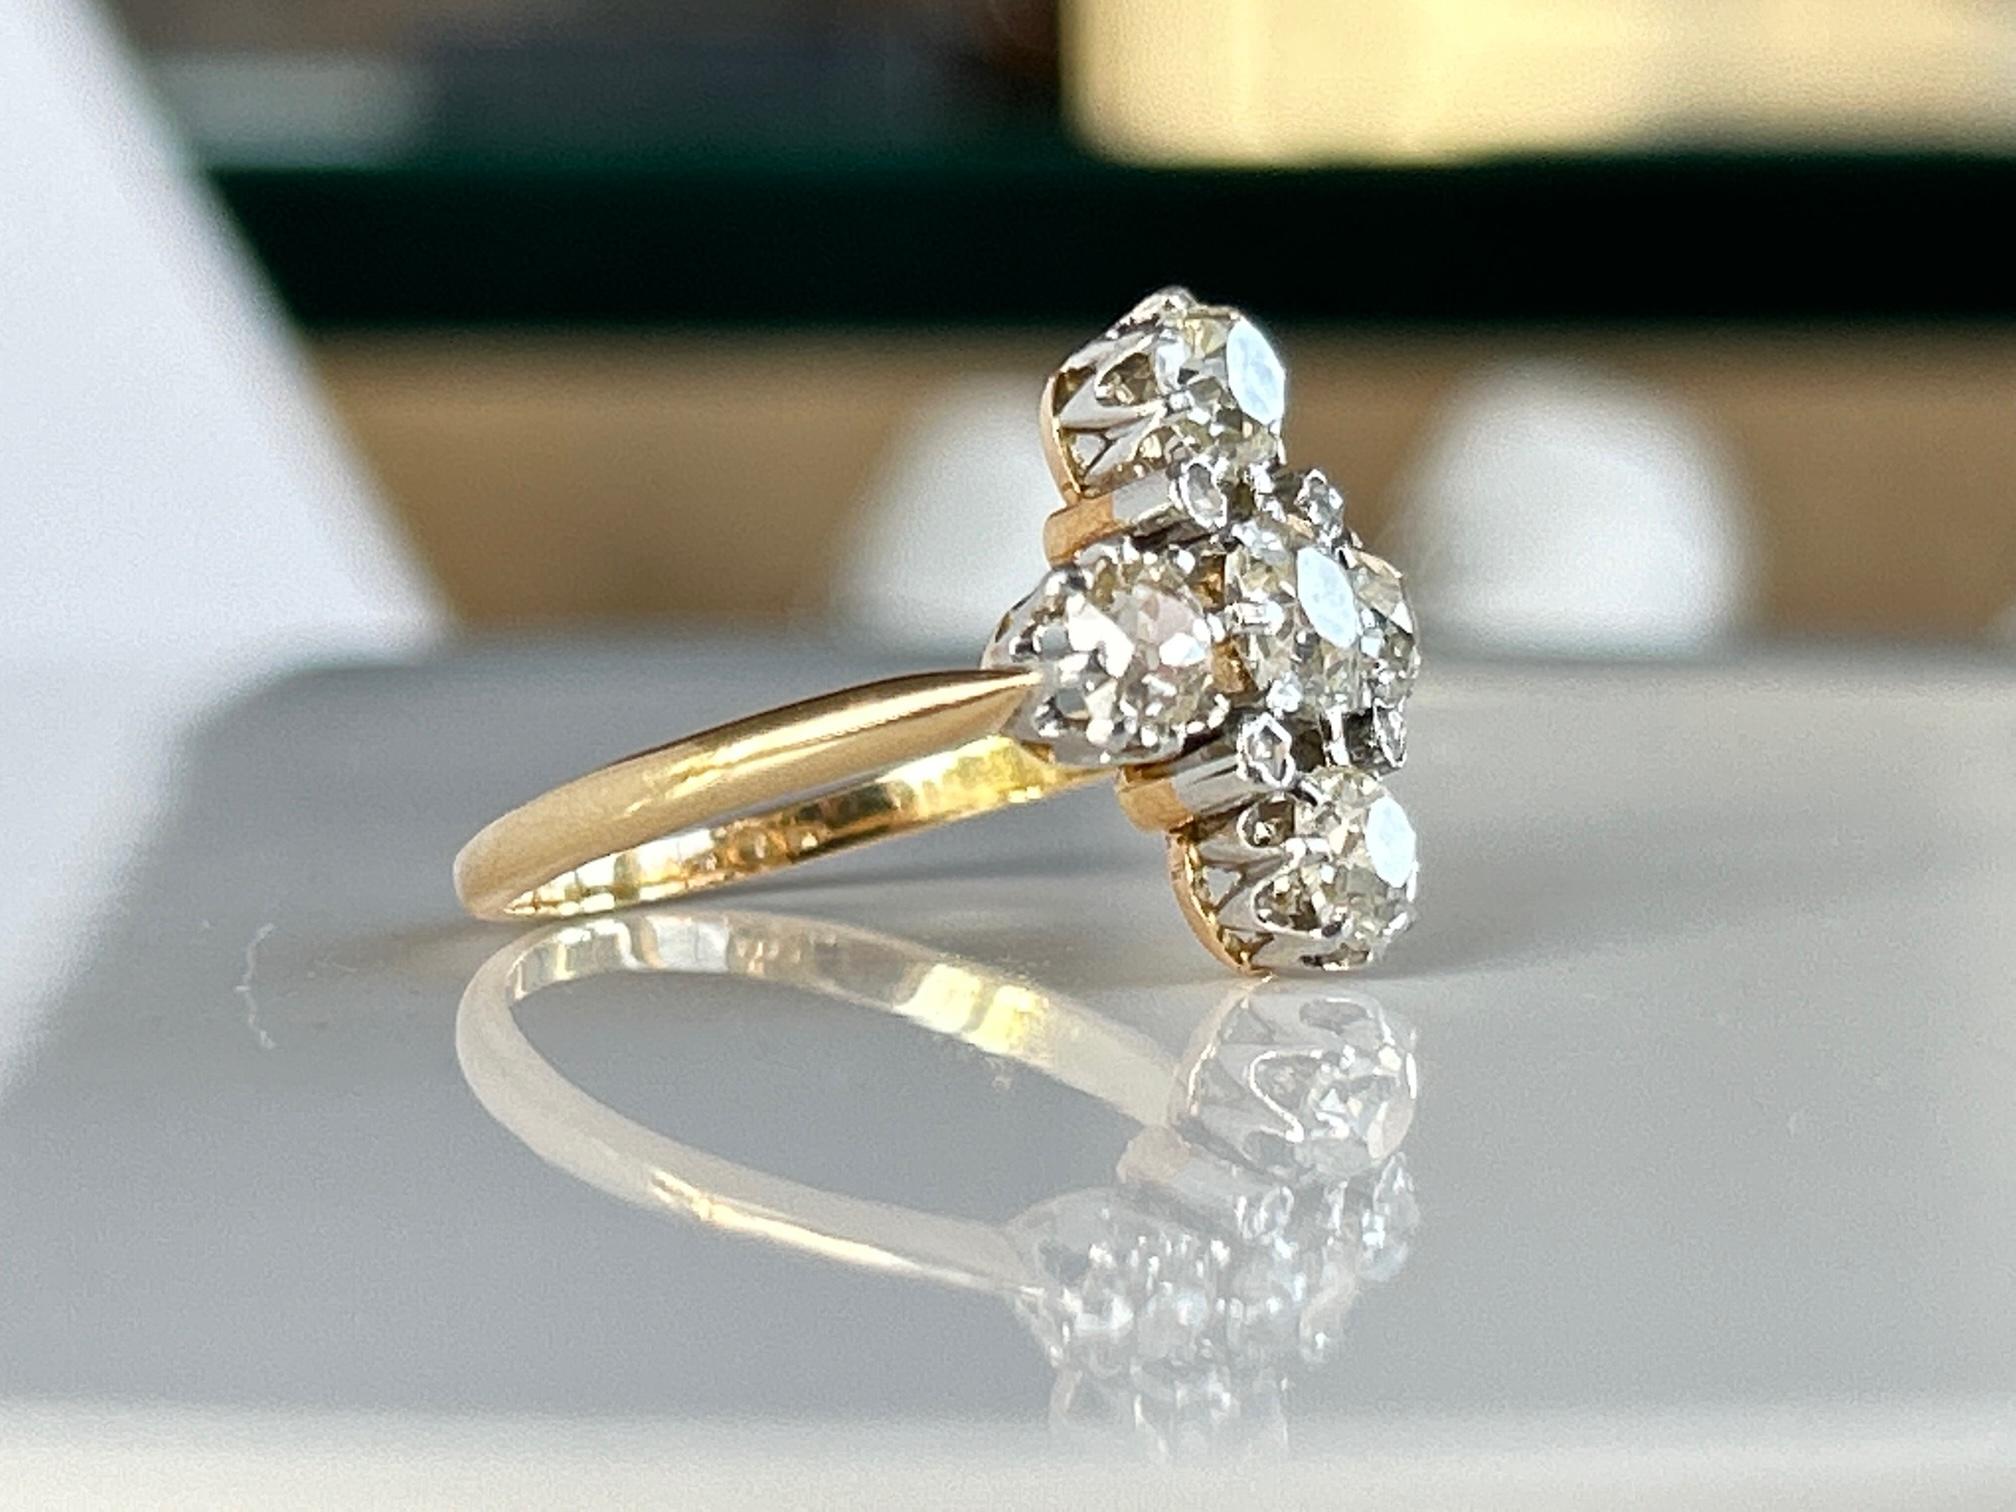 Late Victorian Victorian 2 ct Old Mine Cut Diamond Engagement Ring 18k Gold & Plat For Sale